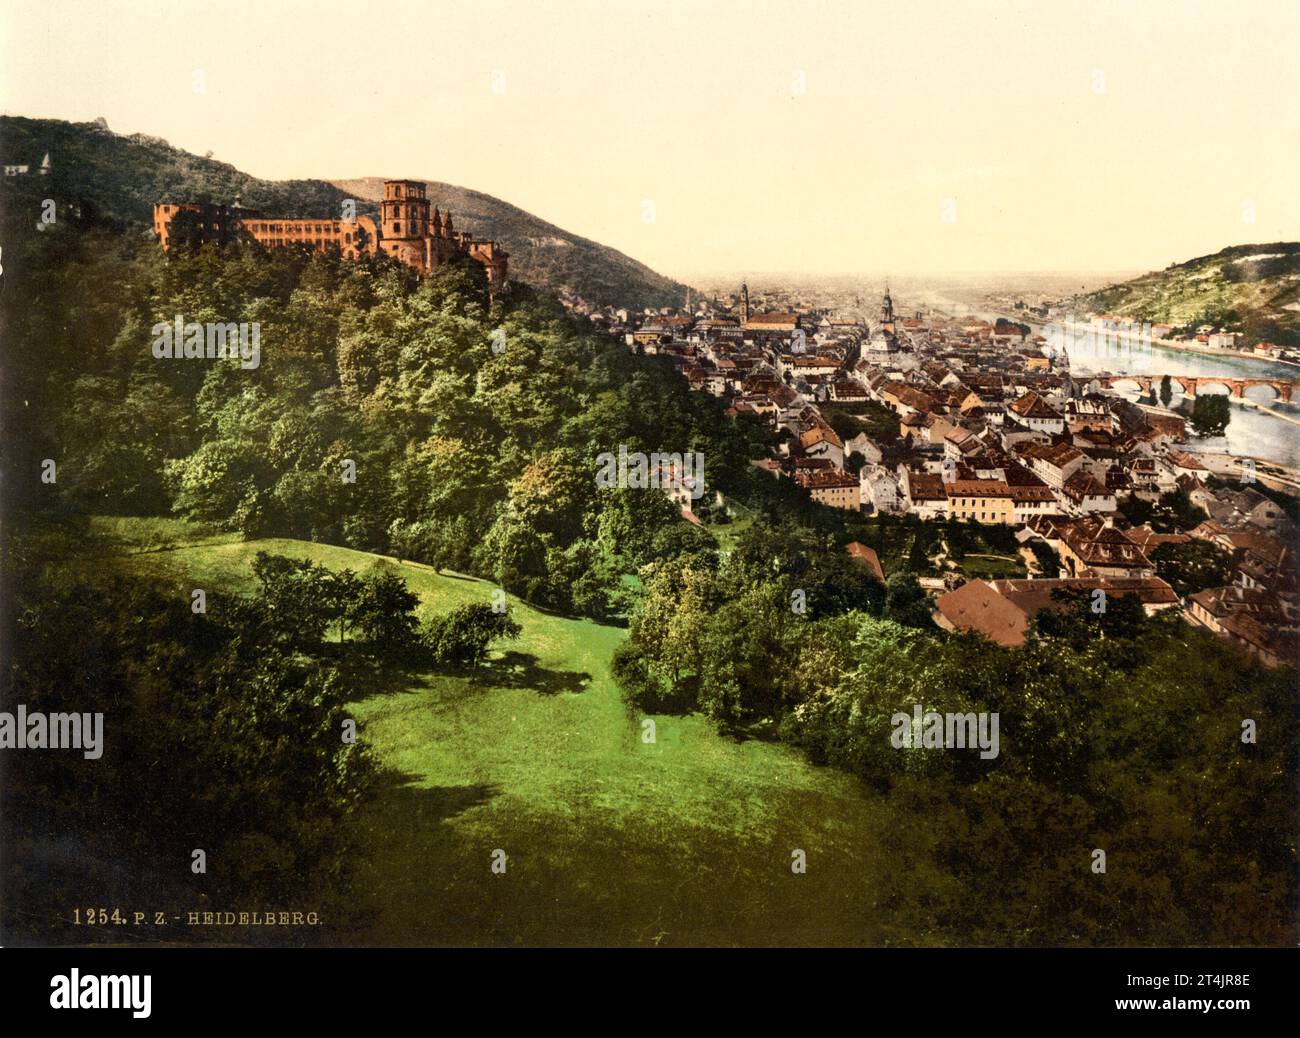 Heidelberg, seen from the Terrace, Germany, ca. 1895  Photochrom print by Photoglob Zürich, between 1890 and 1900. Stock Photo